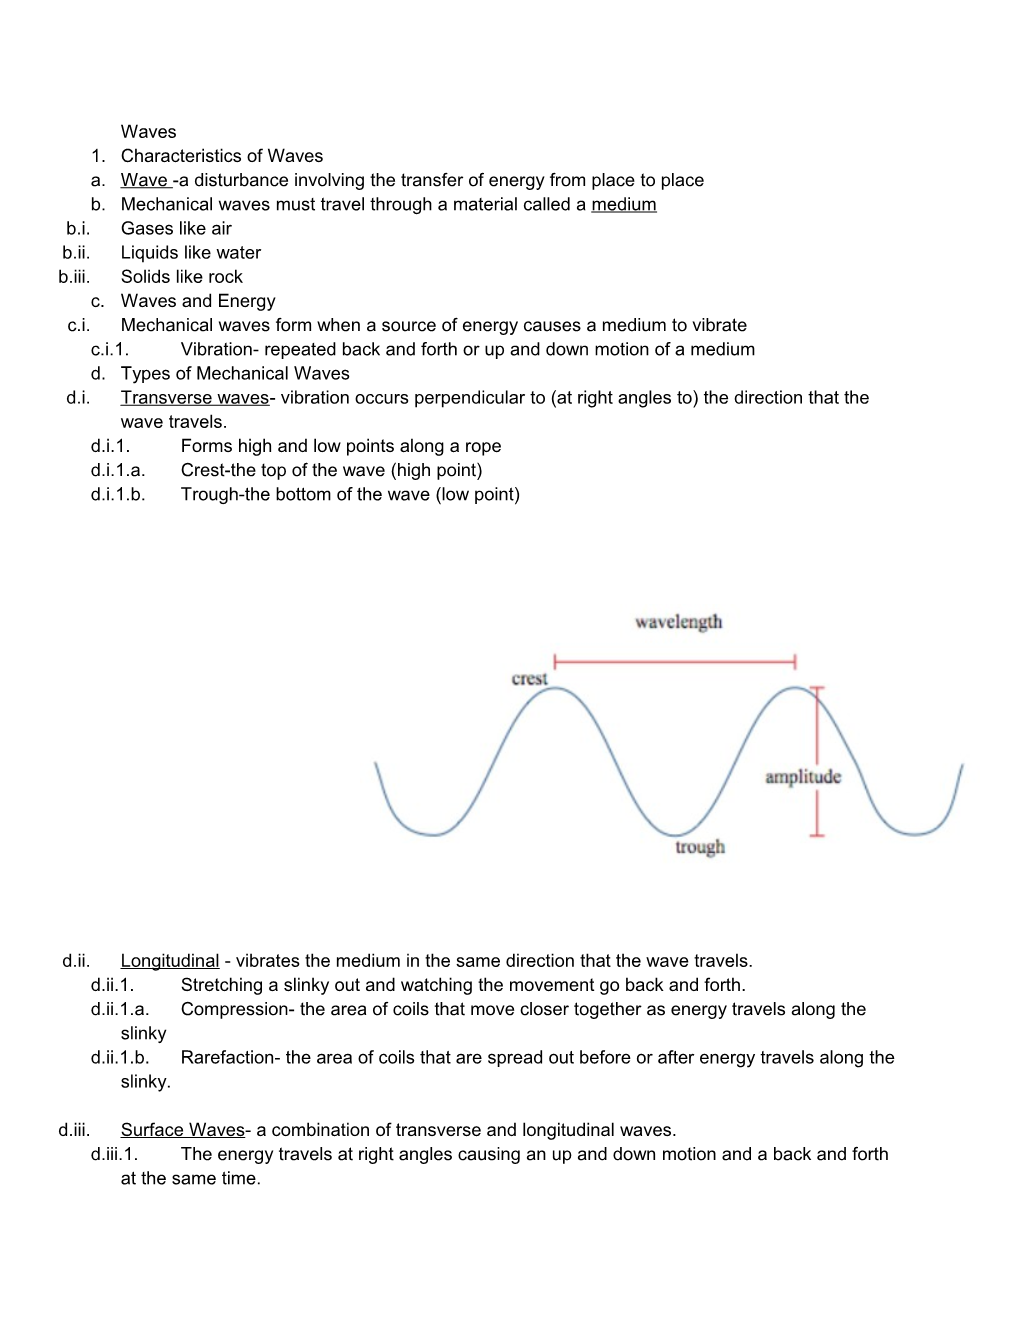 A. Wave -A Disturbance Involving the Transfer of Energy from Place to Place